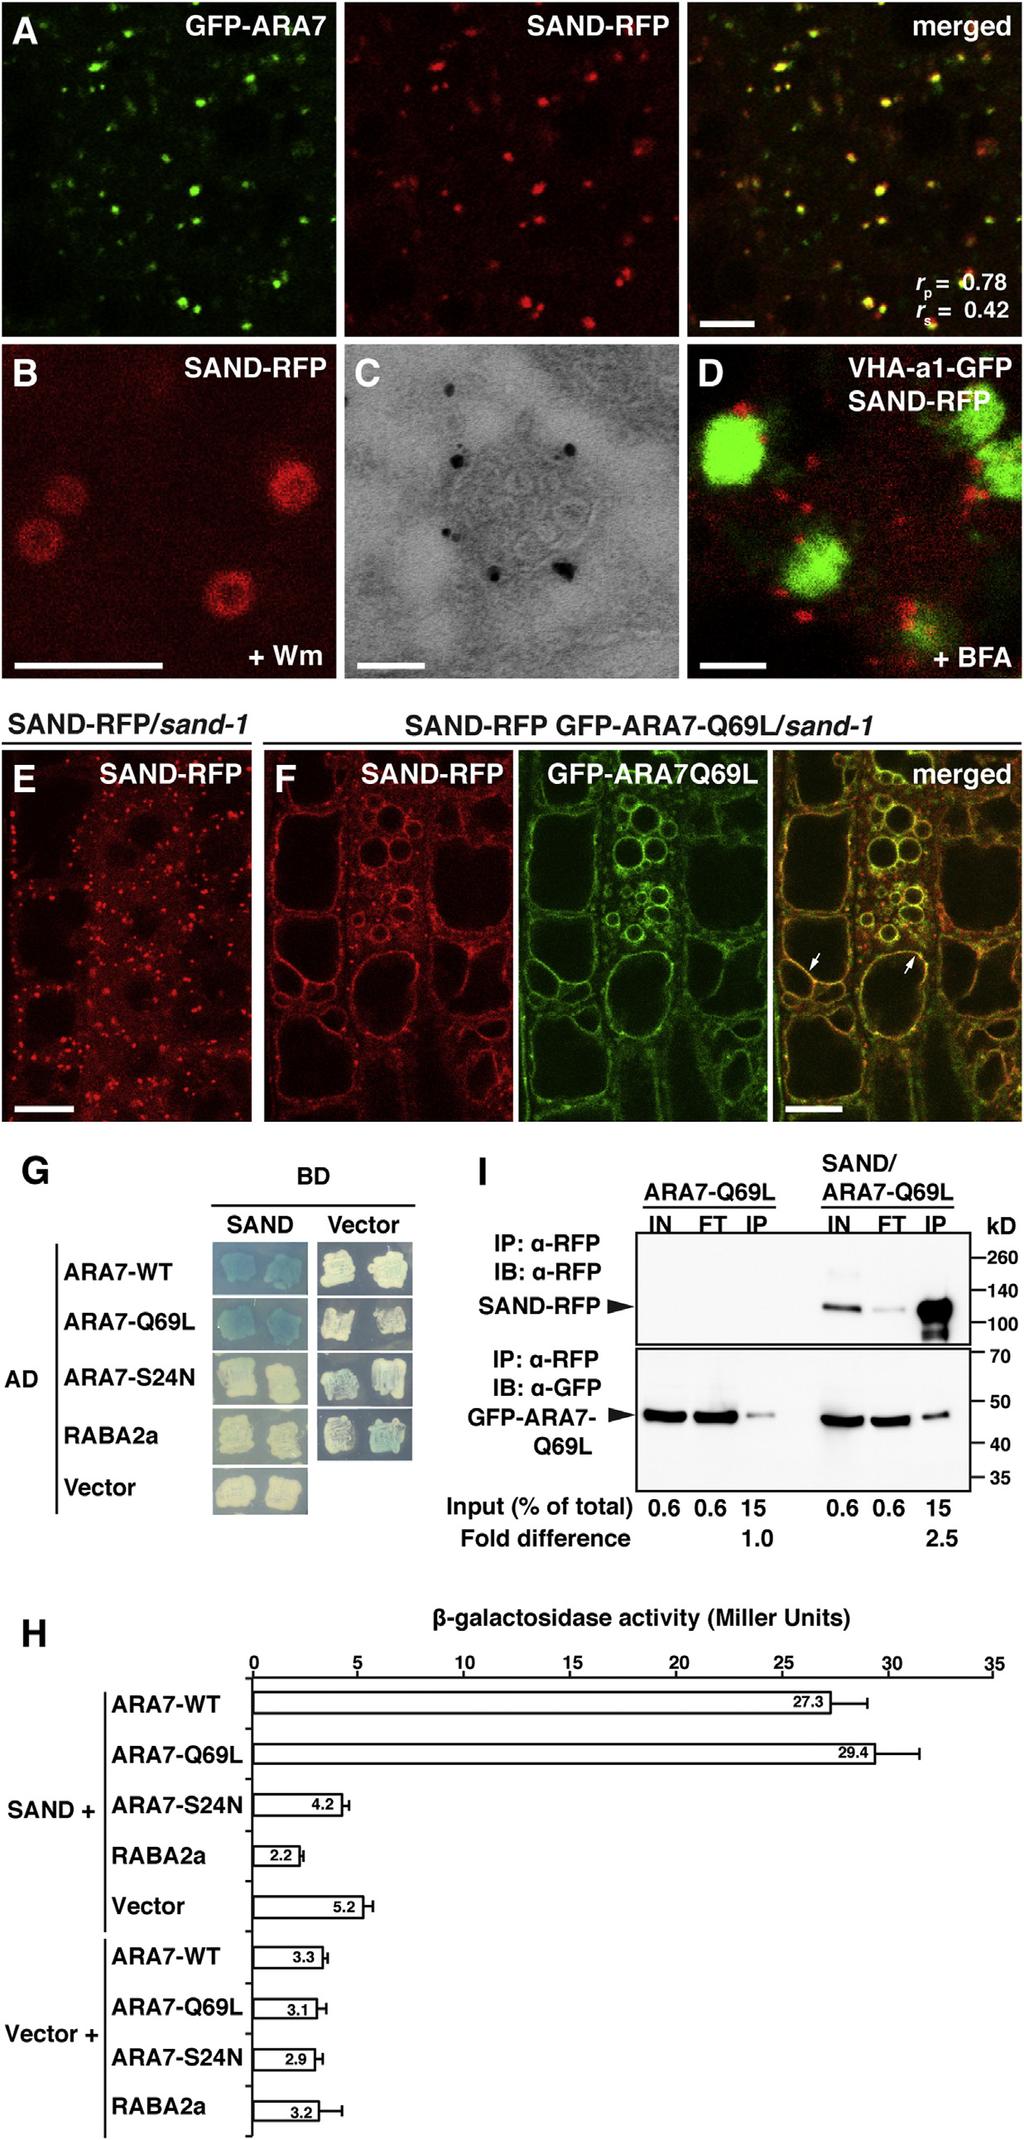 Current Biology Vol 24 No 12 1386 Figure 3. SAND Protein Localization and Interaction with Rab5-like ARA7 (A) Colocalization of SAND-RFP with GFP-ARA7.